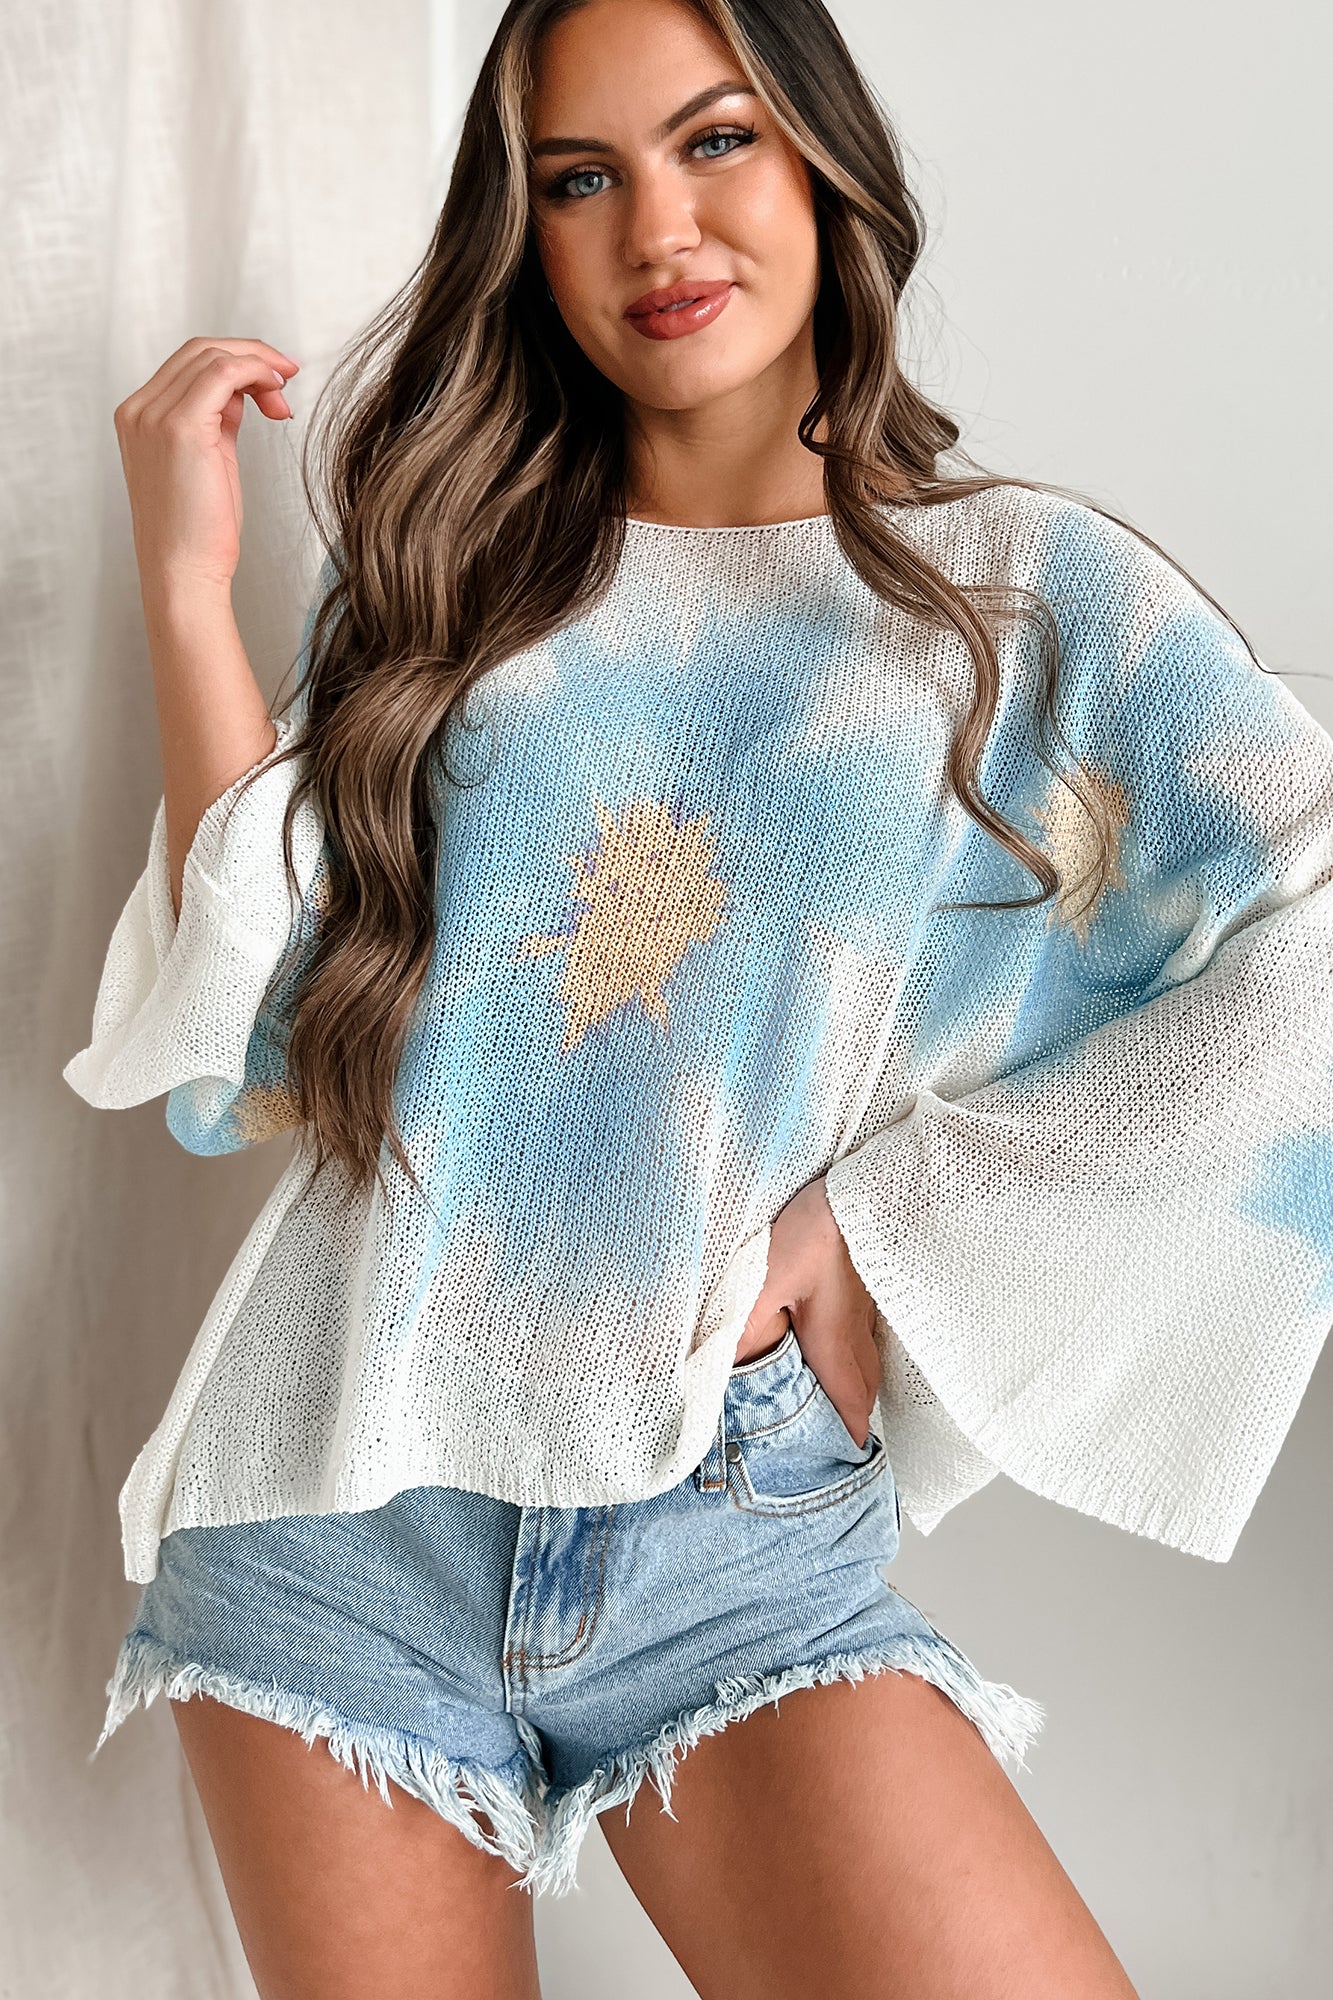 Beginning To Bloom Lightweight Dyed Floral Top (Ivory/Blue) - NanaMacs